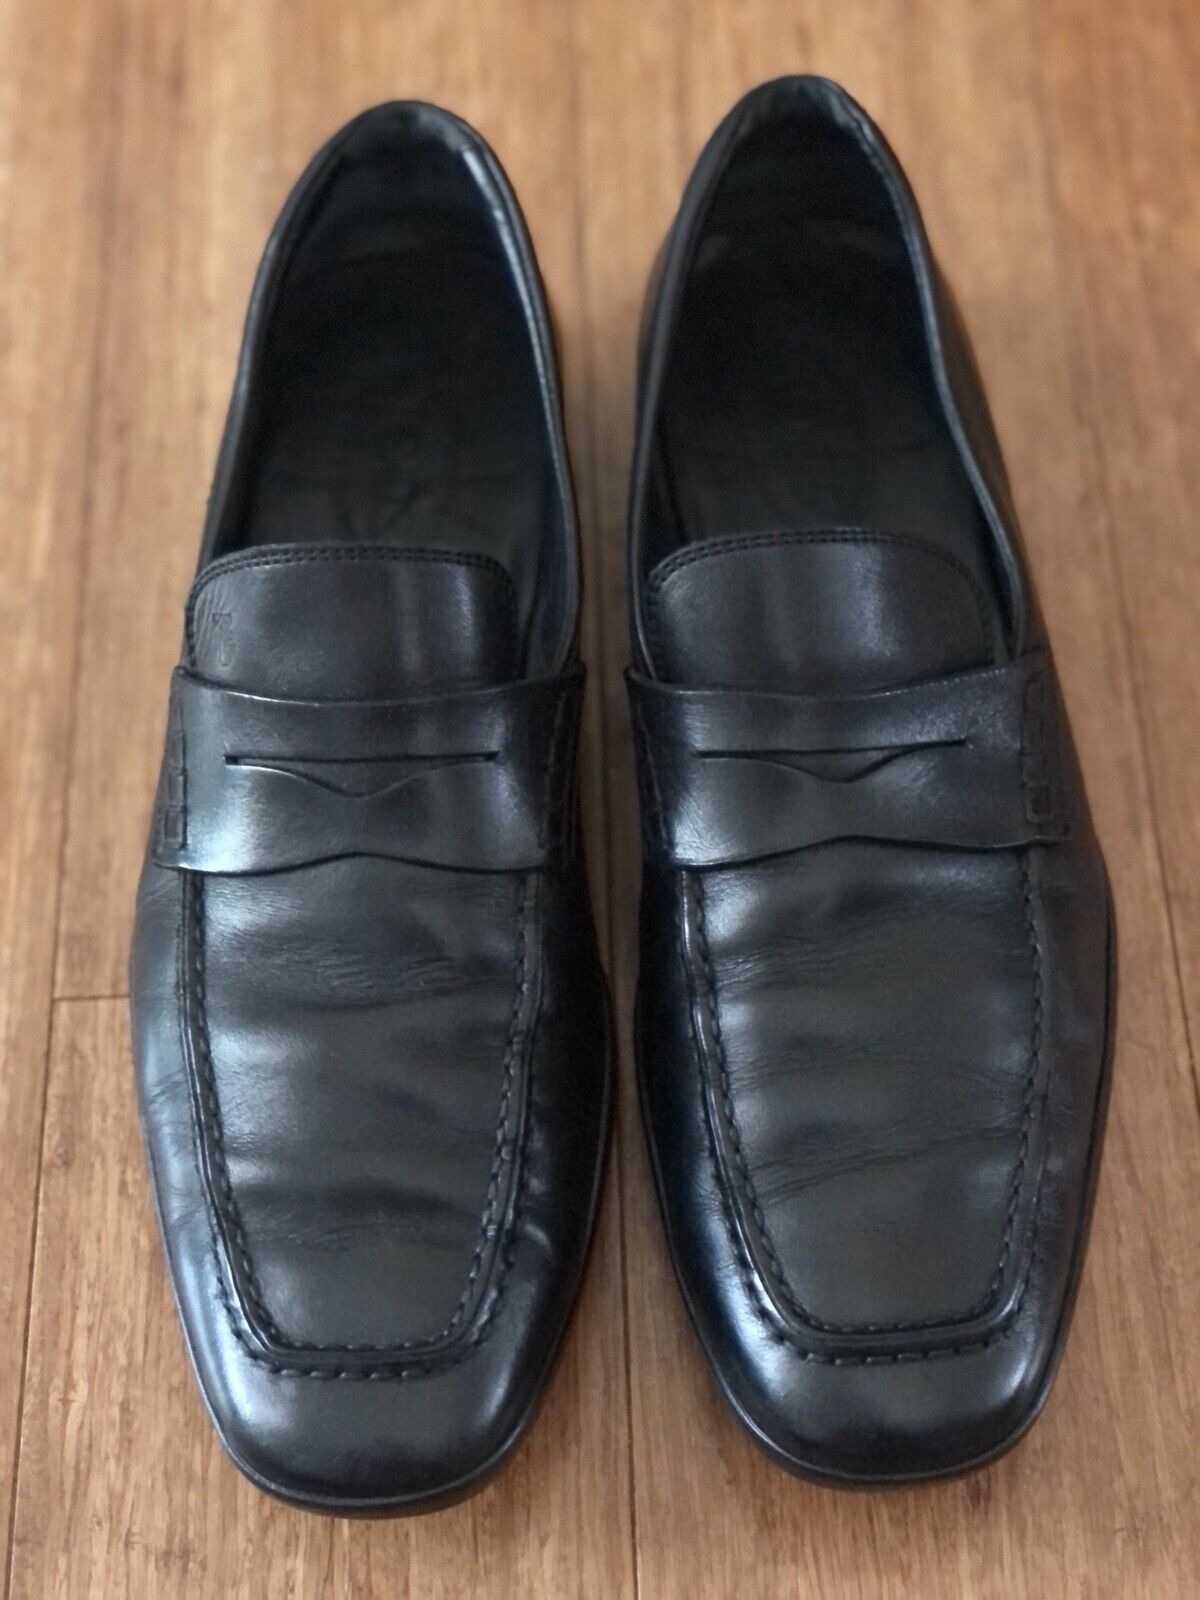 Tod’s BLACK leather PENNY LOAFERS Slip On DRIVING MOCCASIN Shoe